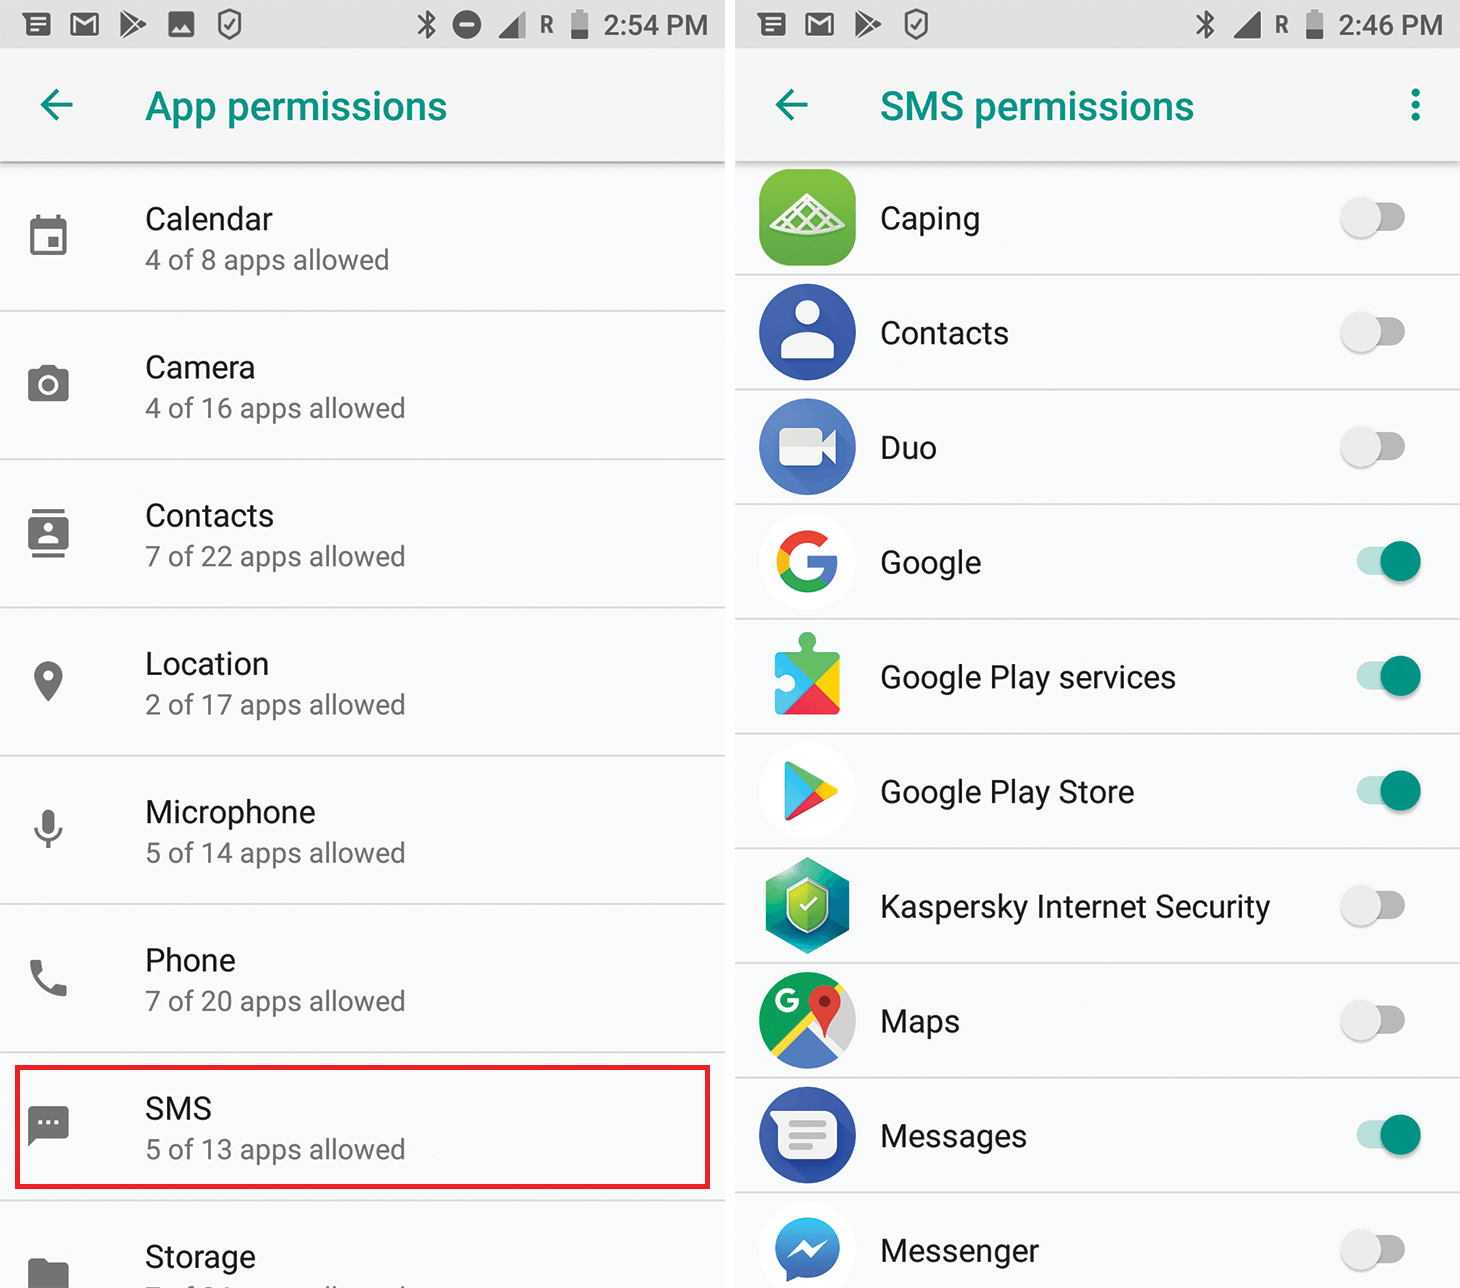 You can manage app permissions on your Android device